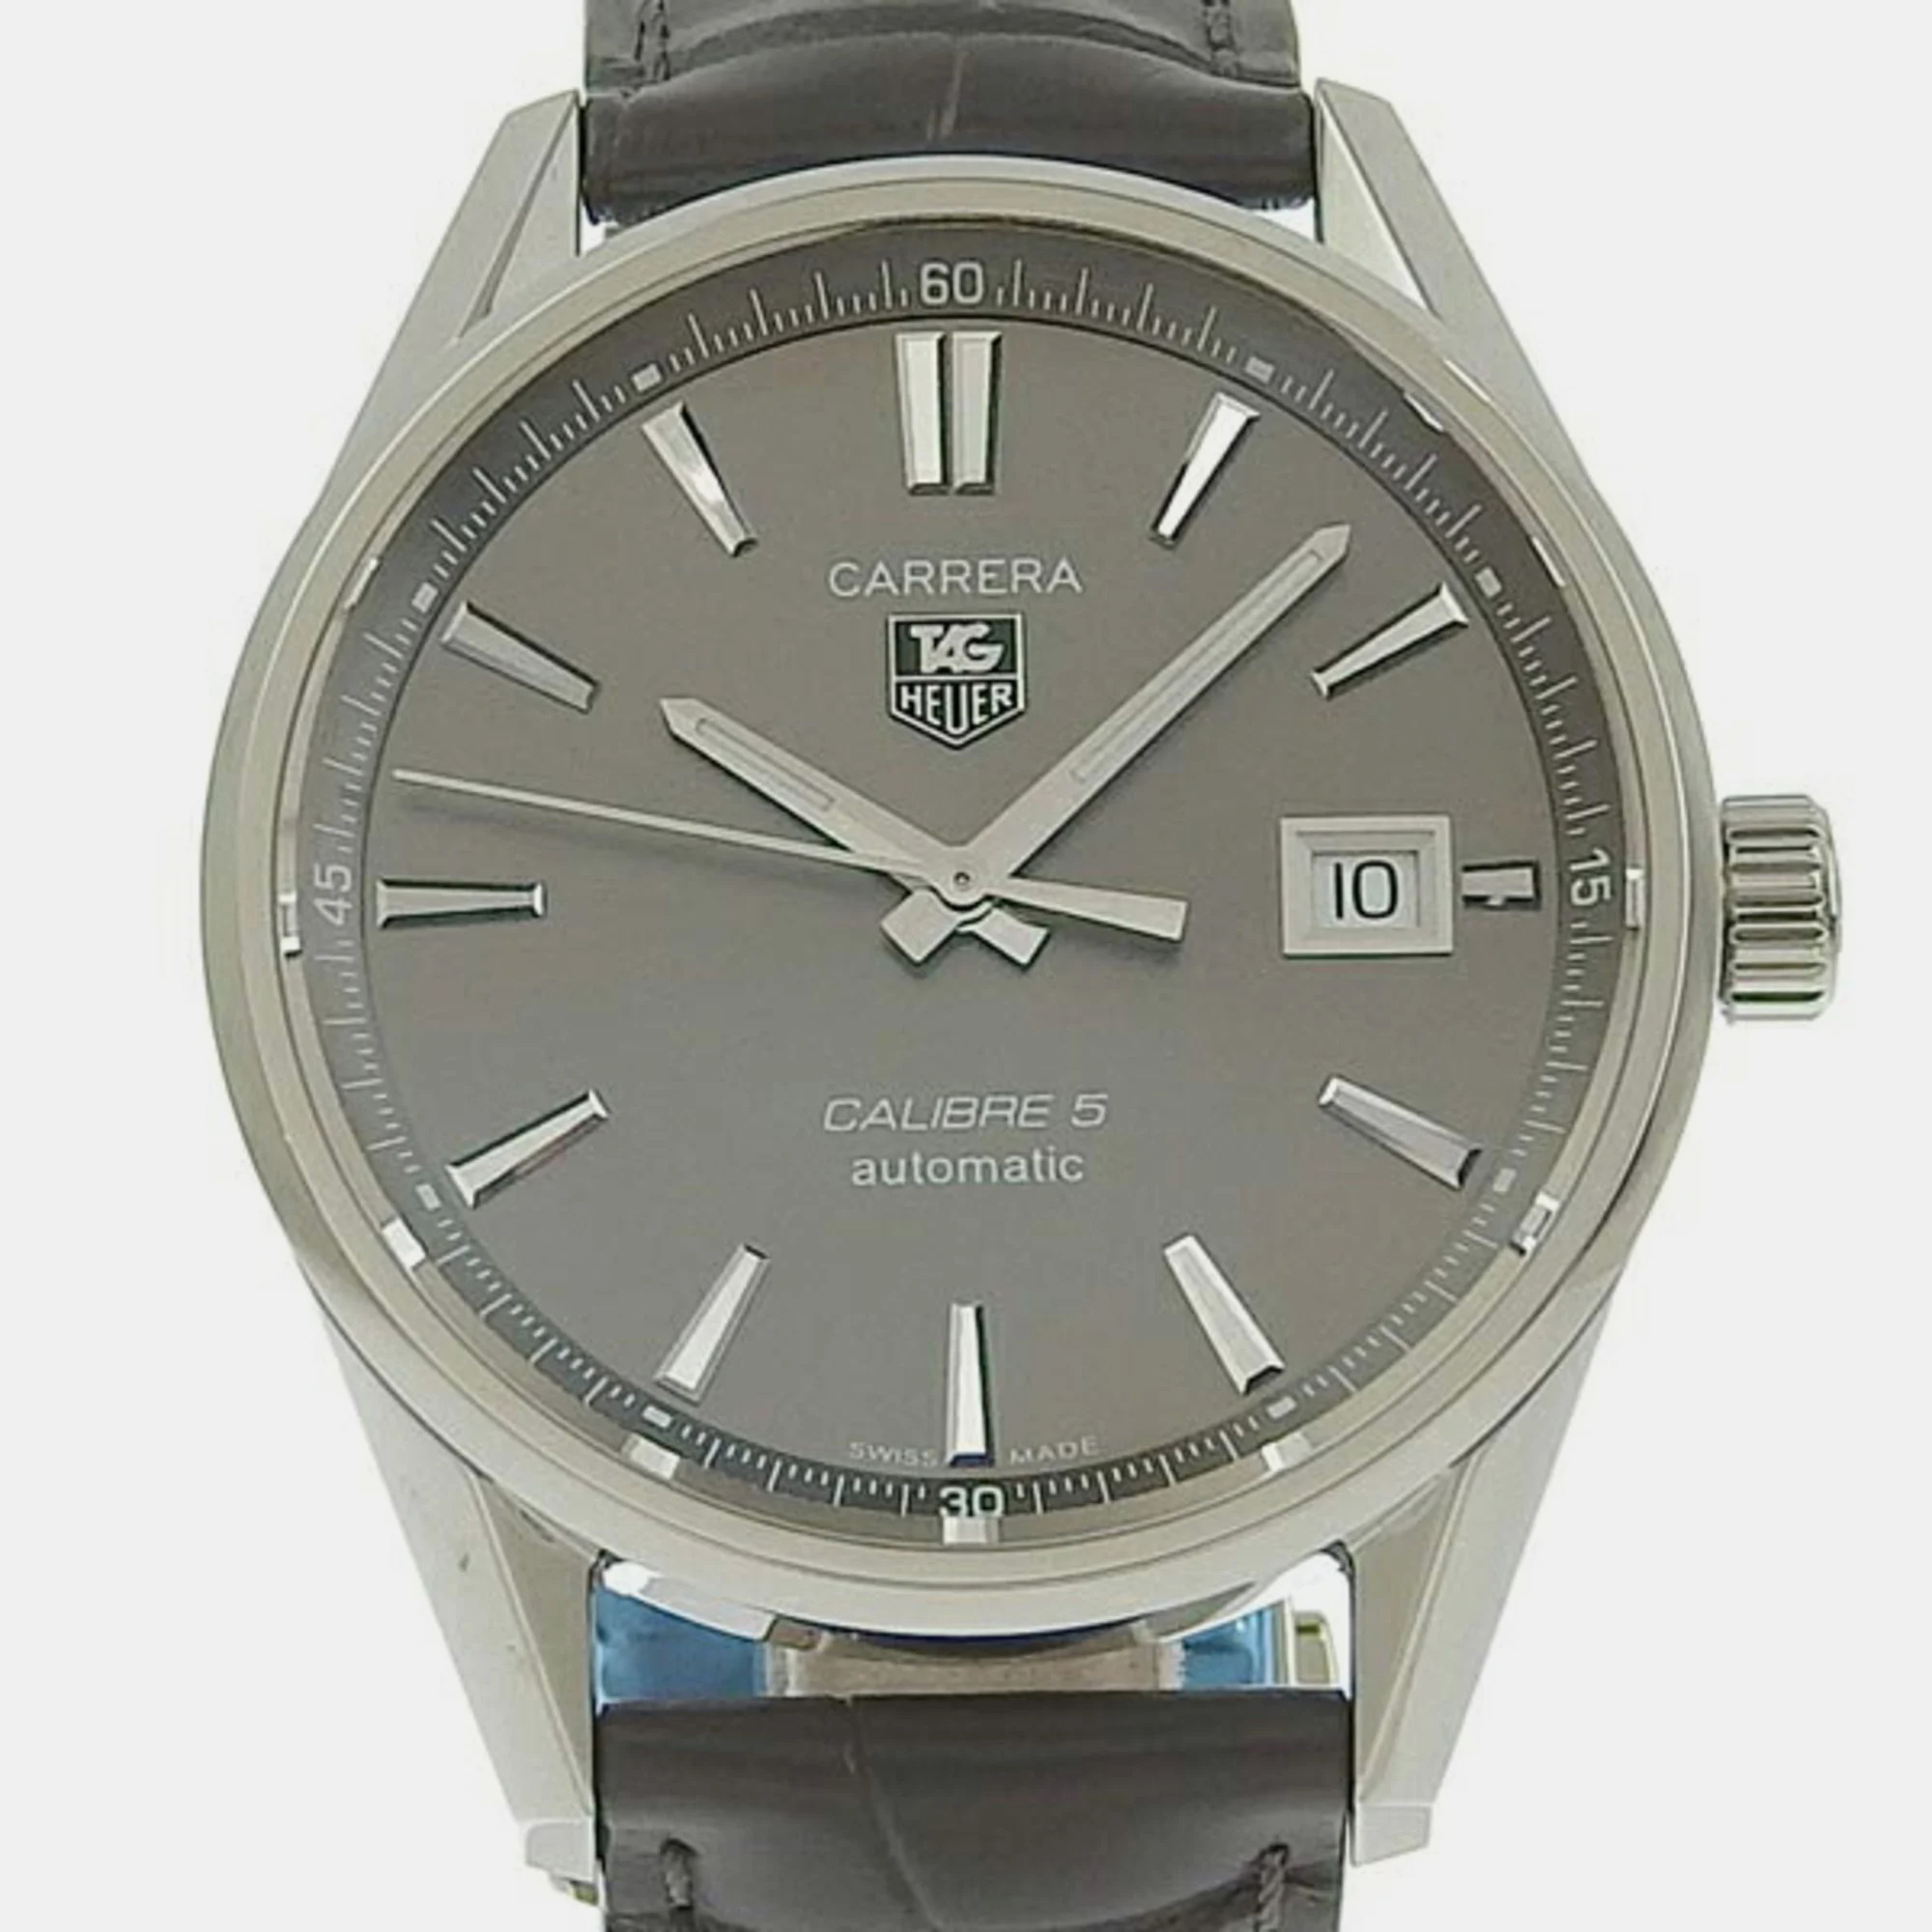 Tag Heuer Grey Stainless Steel Carrera WAR211C Automatic Men's Wristwatch 39 Mm